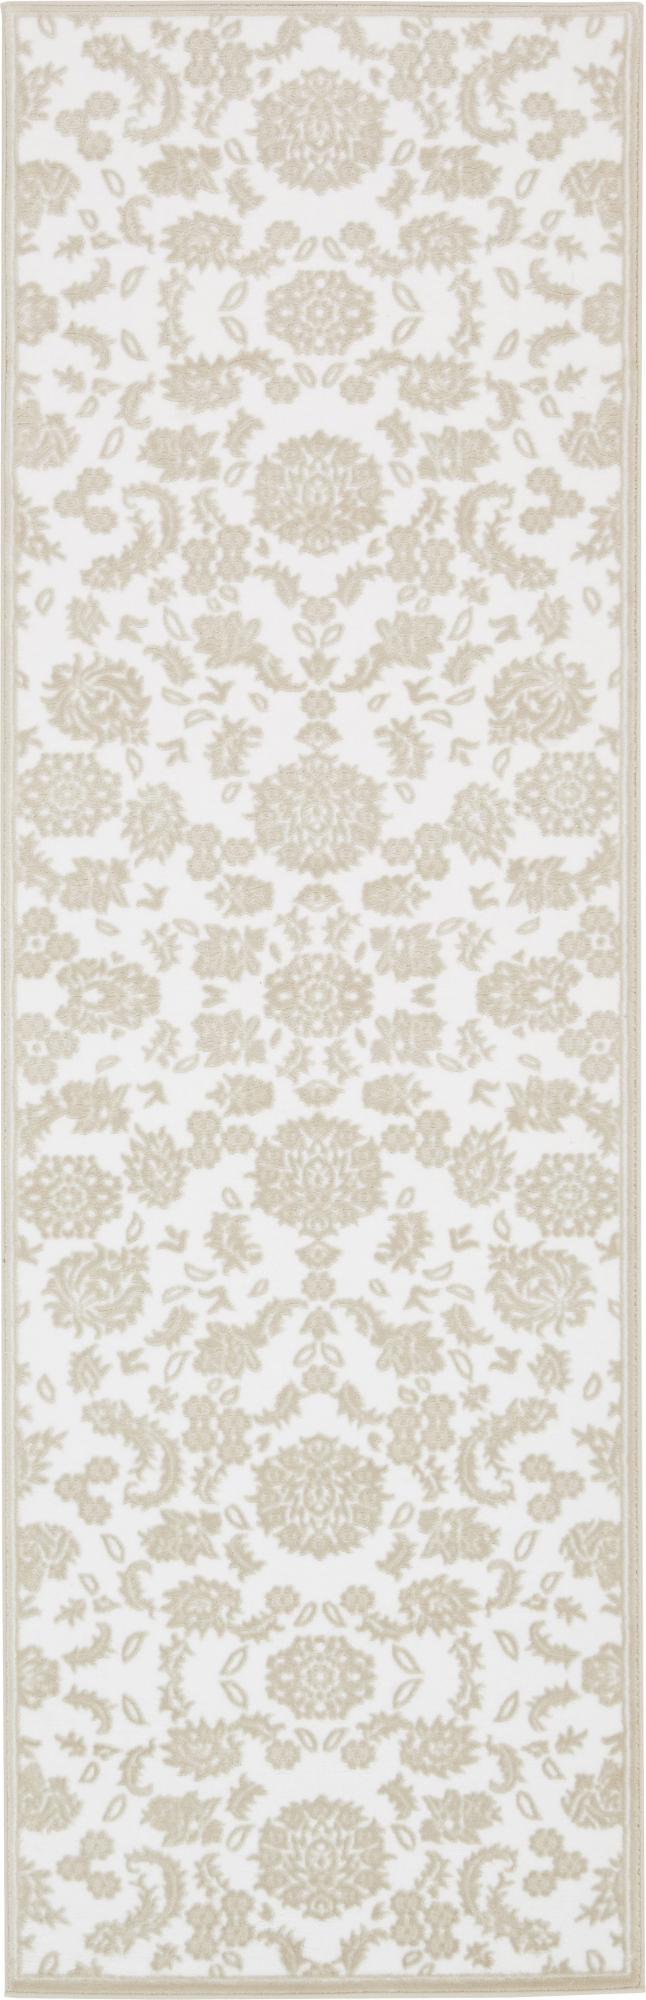 rugpal keystone traditional area rug collection